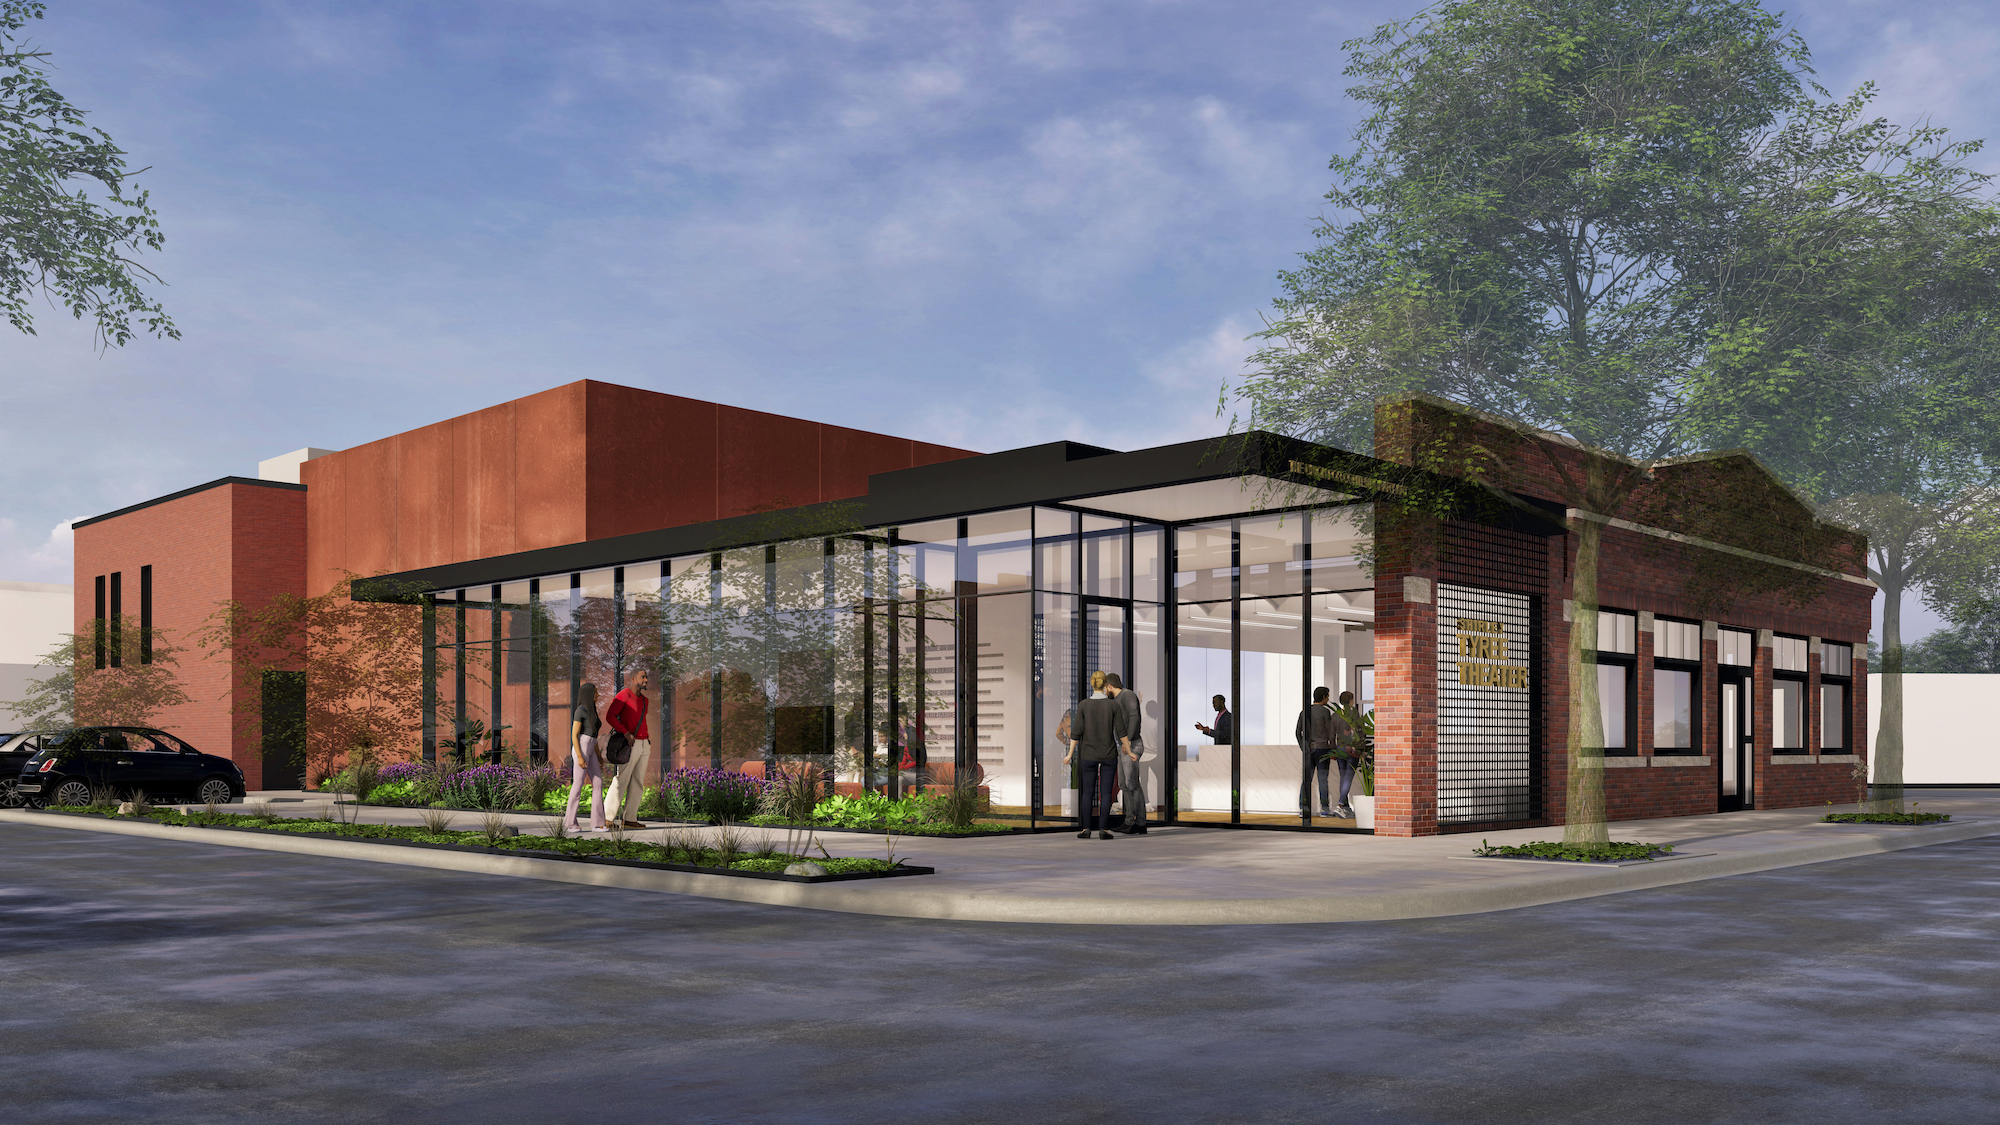 Union theater rendering exterior view with a glass front and red brick